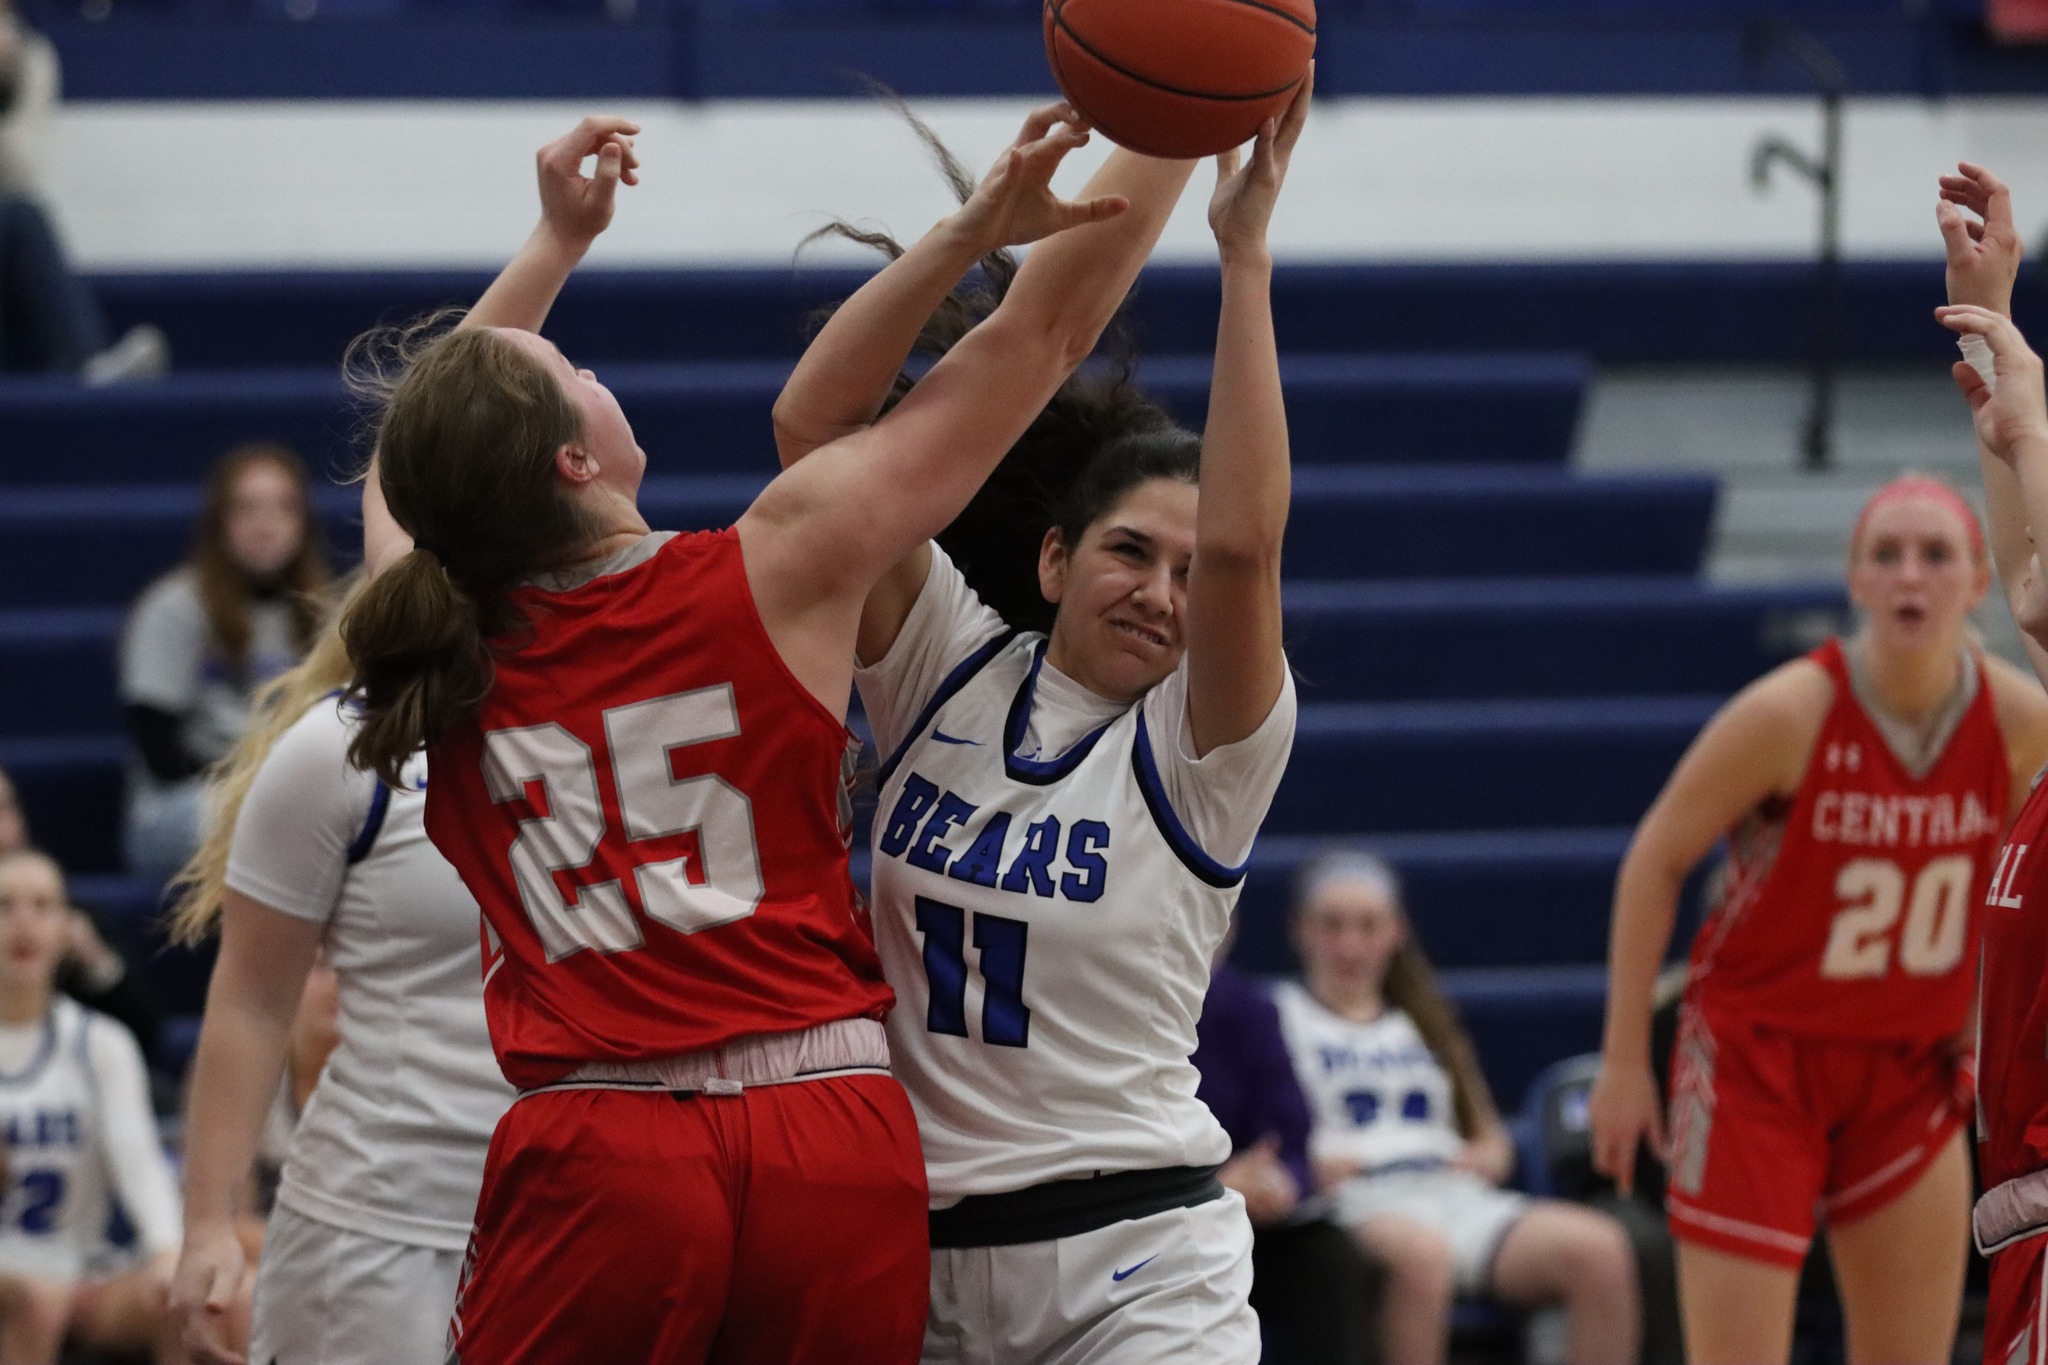 DMACC women's basketball team romps to 80-37 win over Central College JV